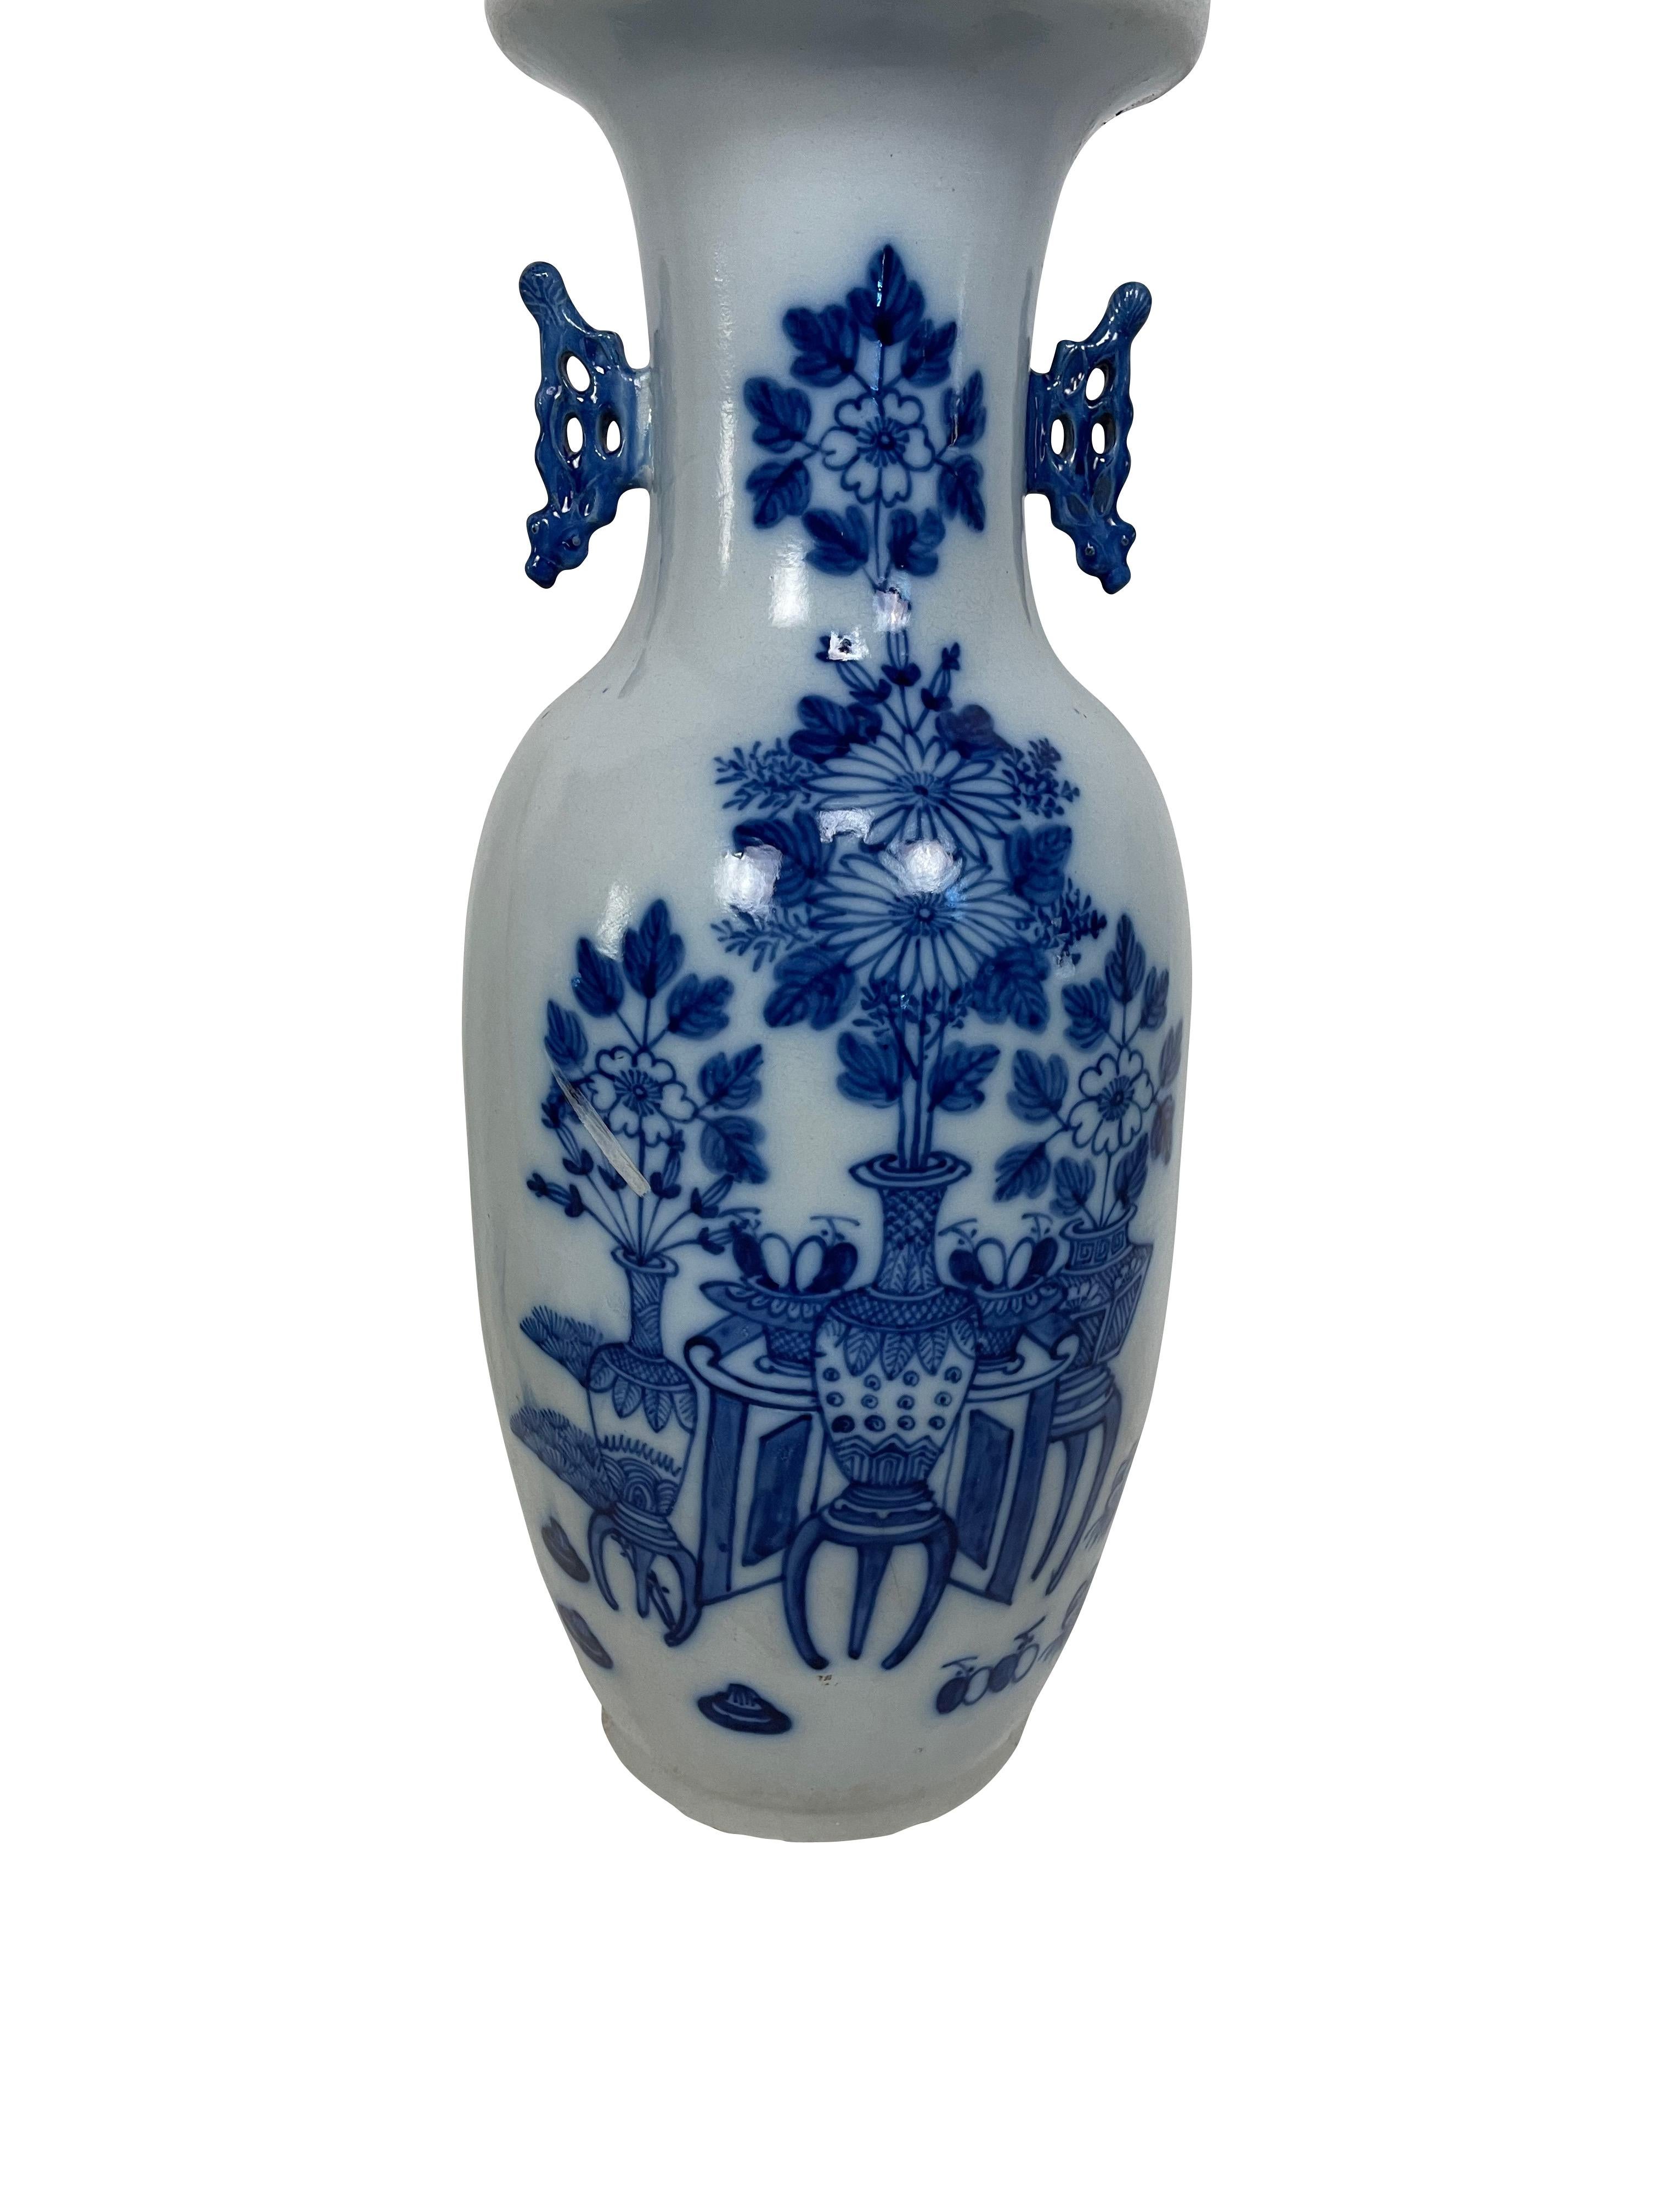 A fine antique 19th-century Chinese porcelain large baluster vase decorated with various flowers and objects in low relief and underglaze cobalt blue within a white-glazed ground. The vase has molded stylized handles in cobalt blue to either side of